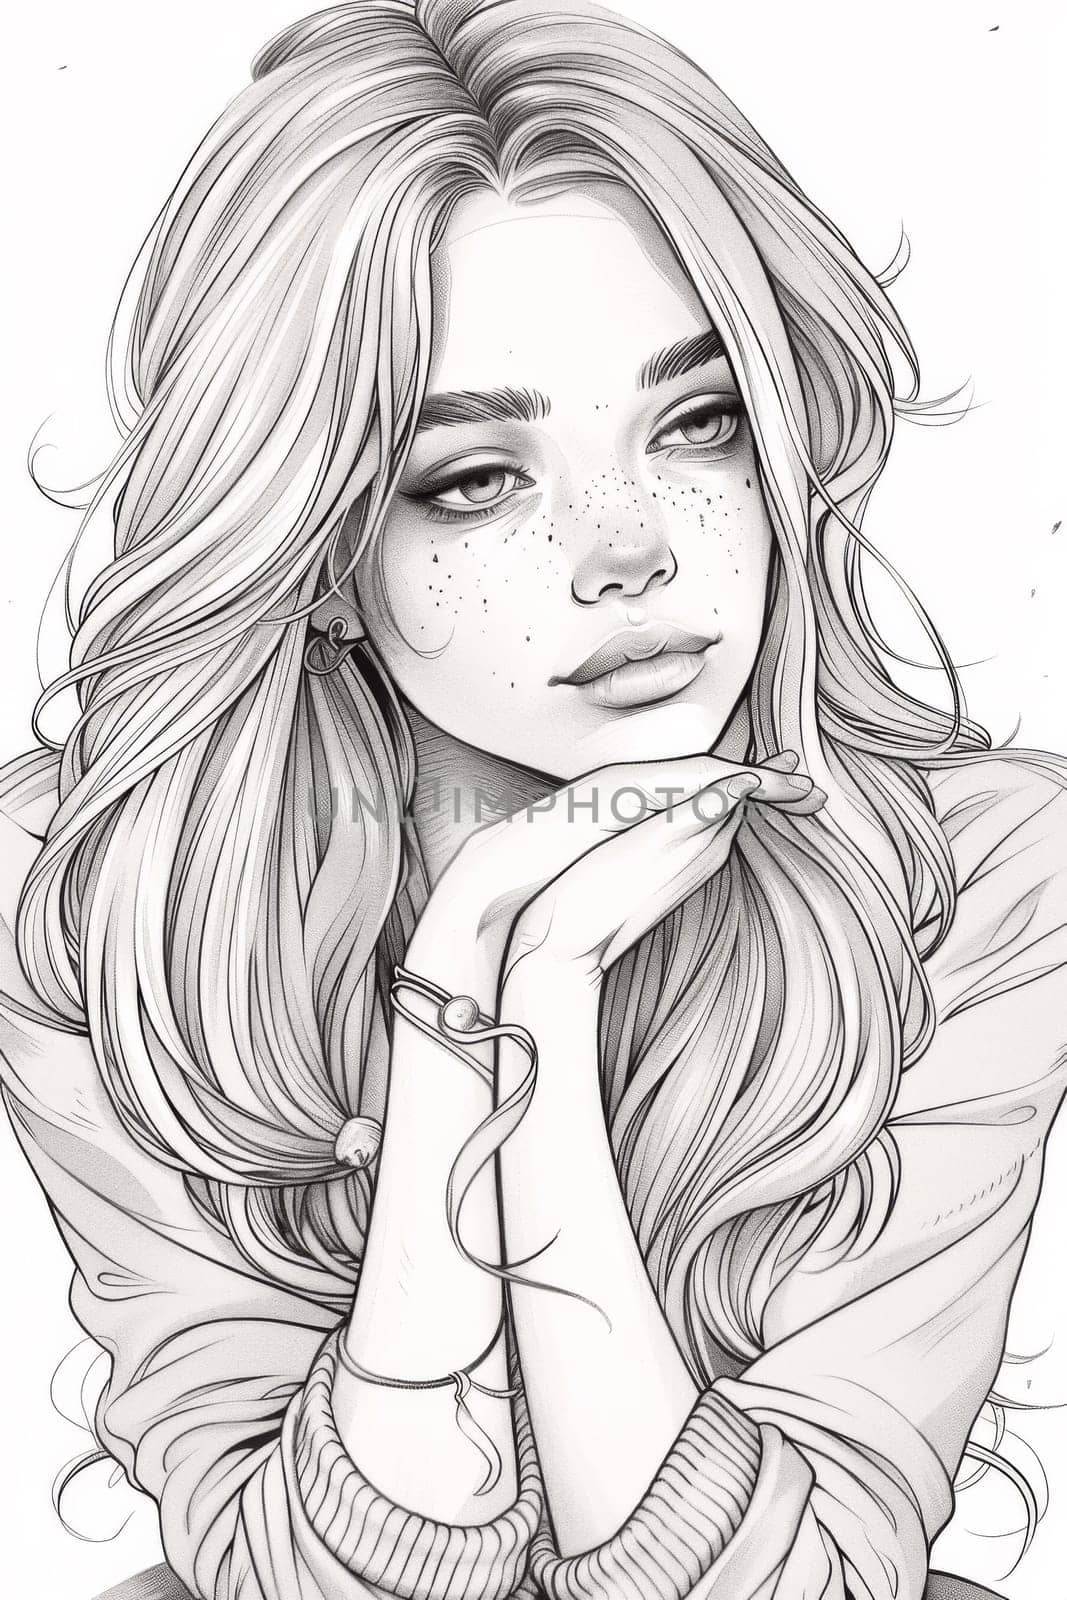 A drawing of a girl with freckles and long hair